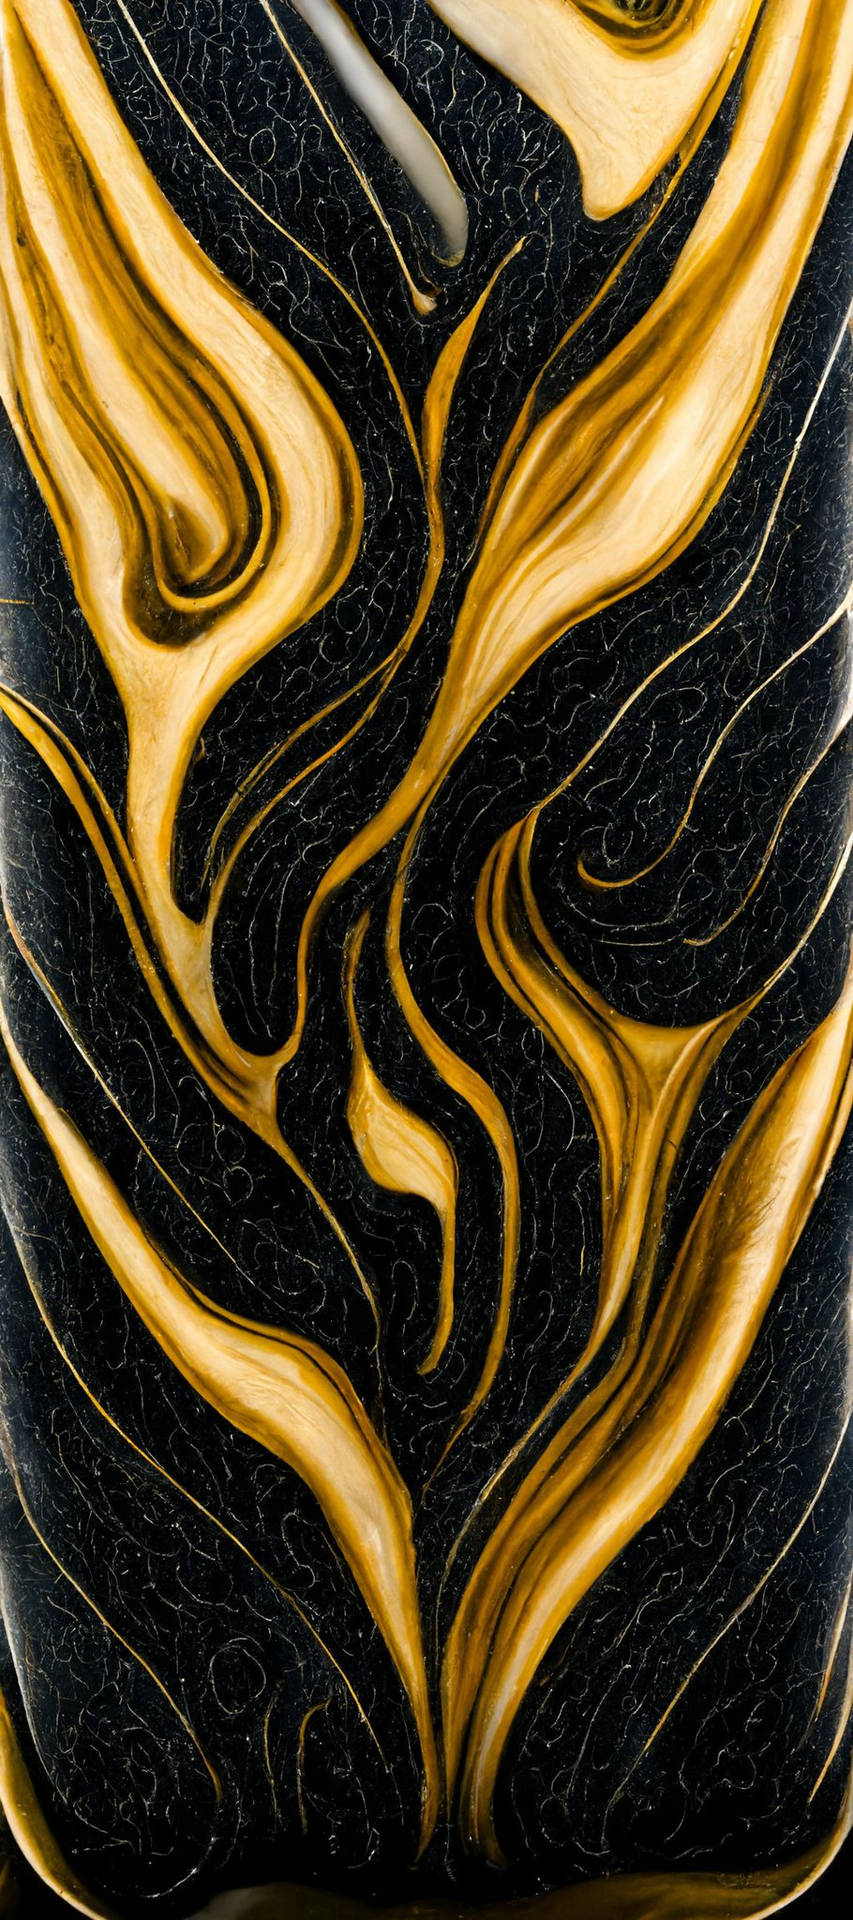 Gold Texture And Black Patterns Wallpaper